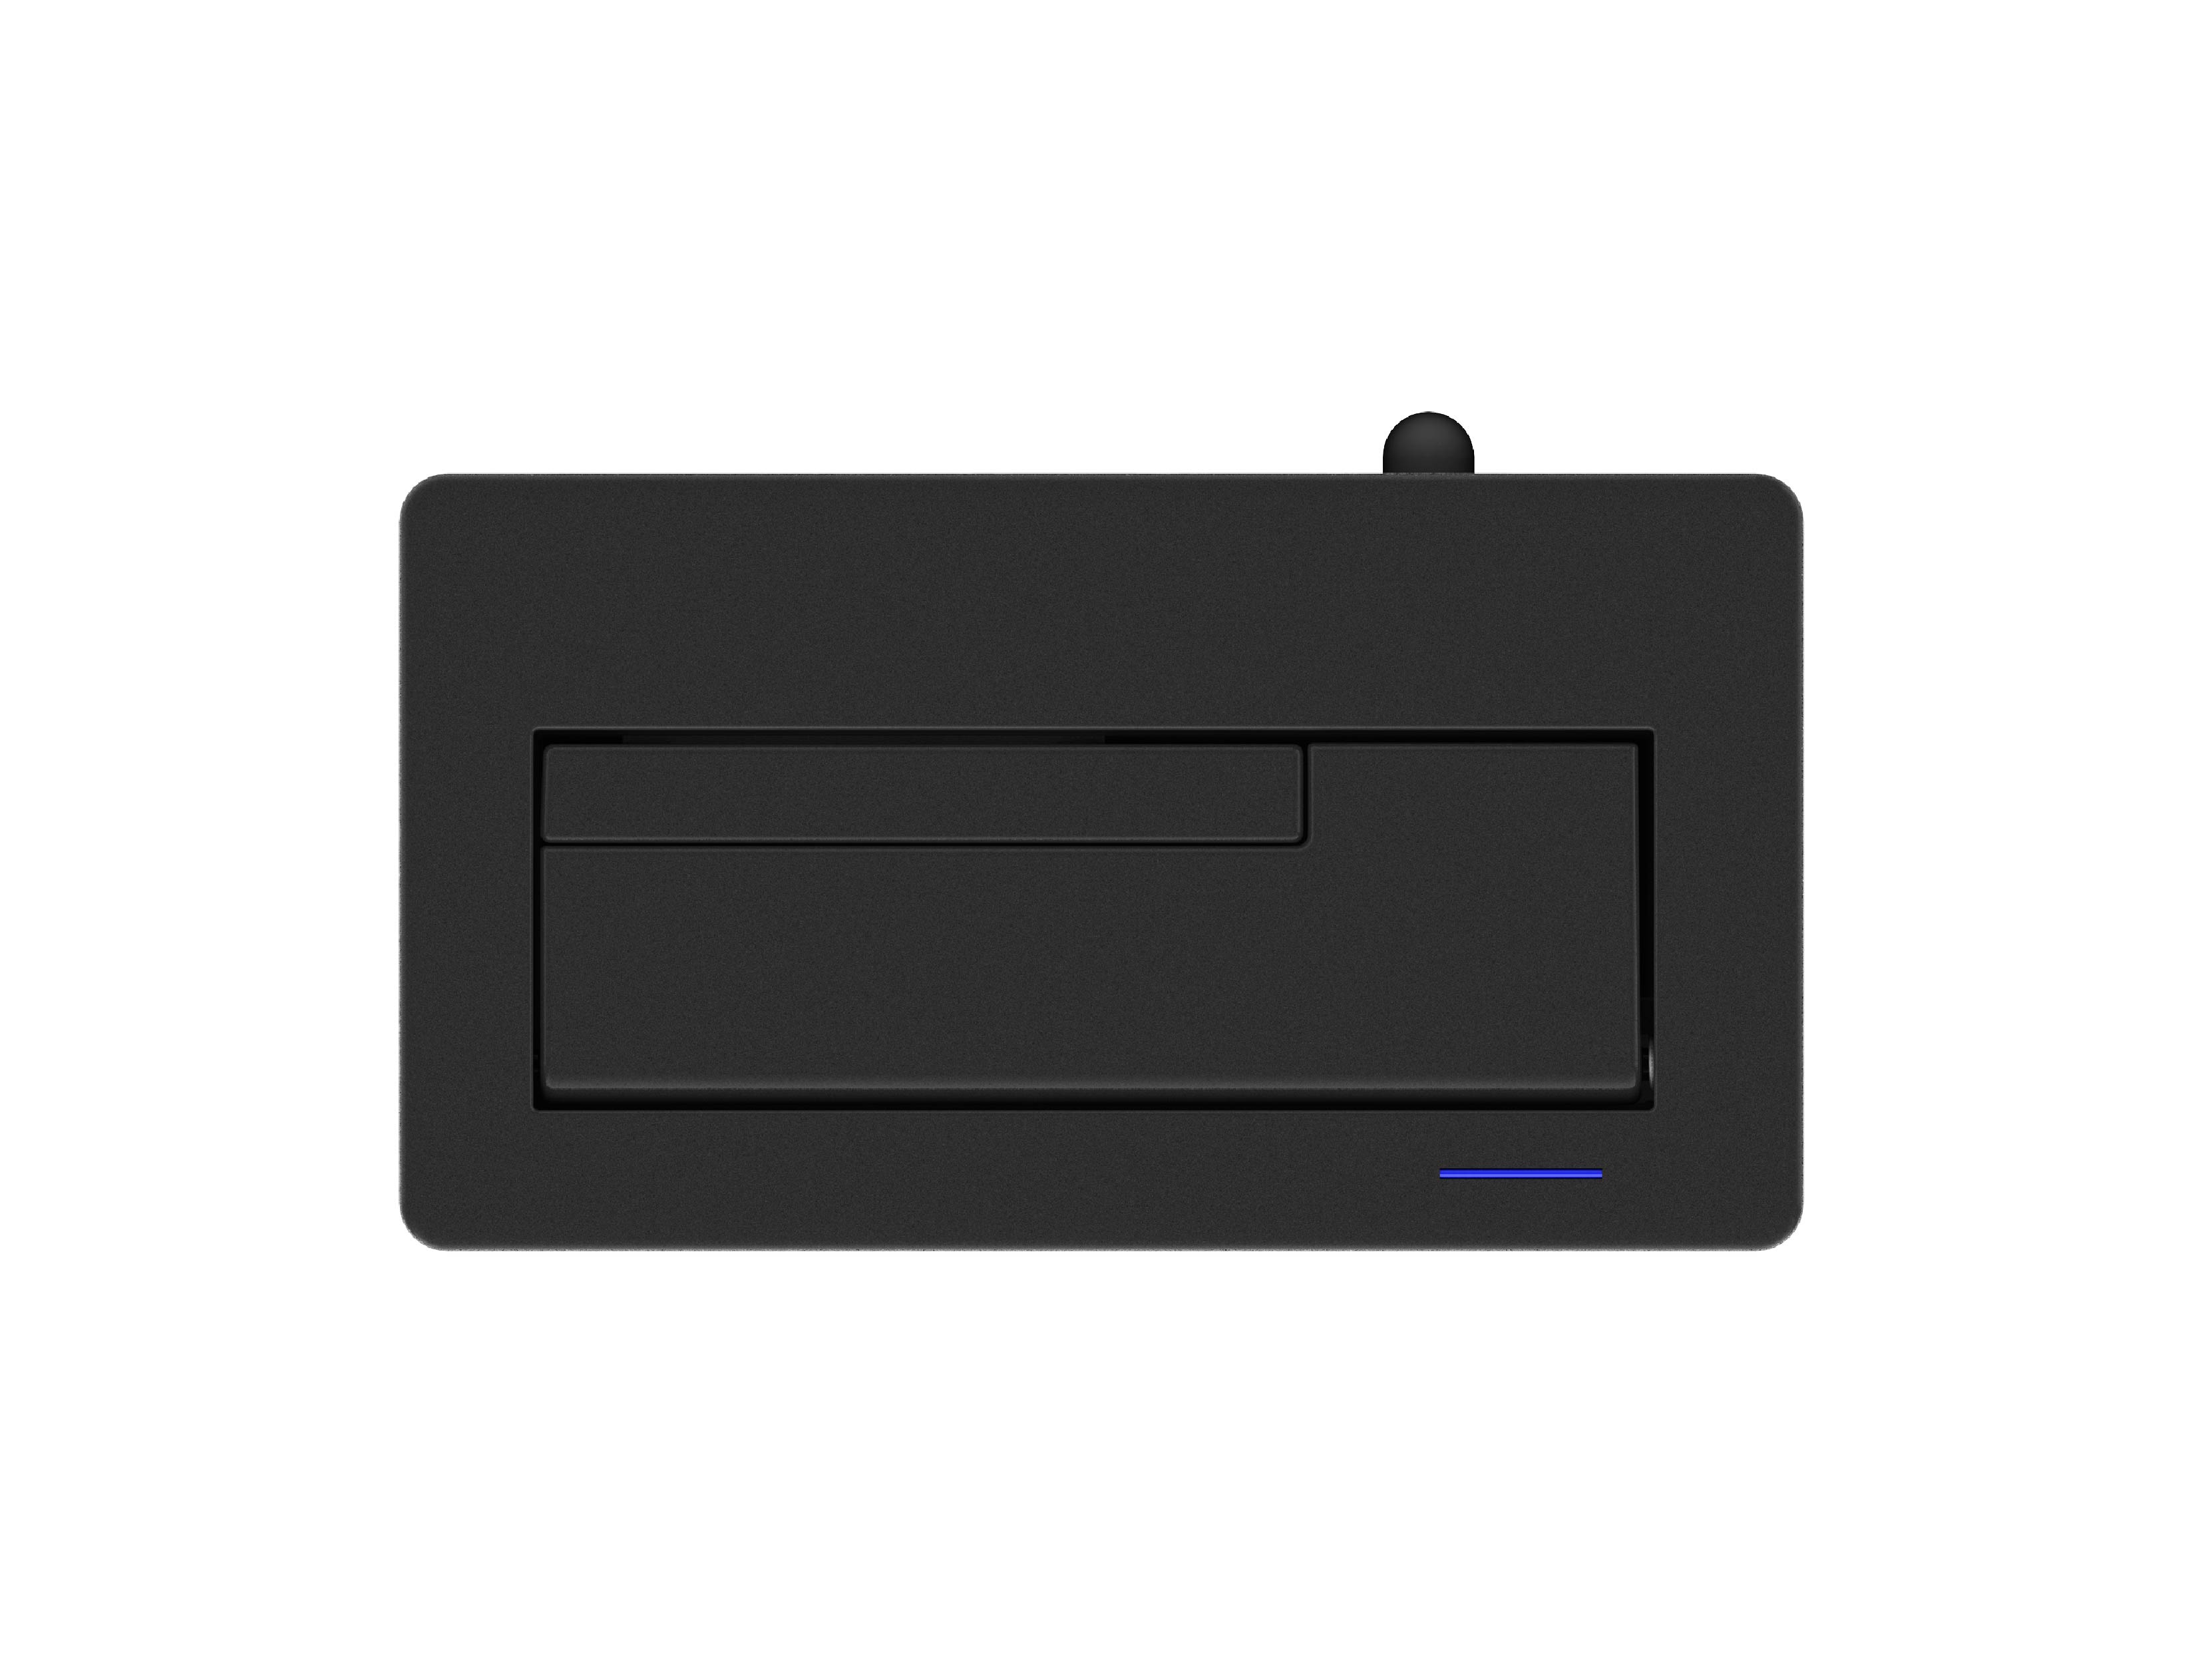 SATA SSD/HDD Dock (SI-7915US31C), Applicable with 3 x 3.5" or 2.5" SATA HDD/SSD, SATA SSD/HDD transfer speeds up to 6Gbps., USB3.2 -C to host.